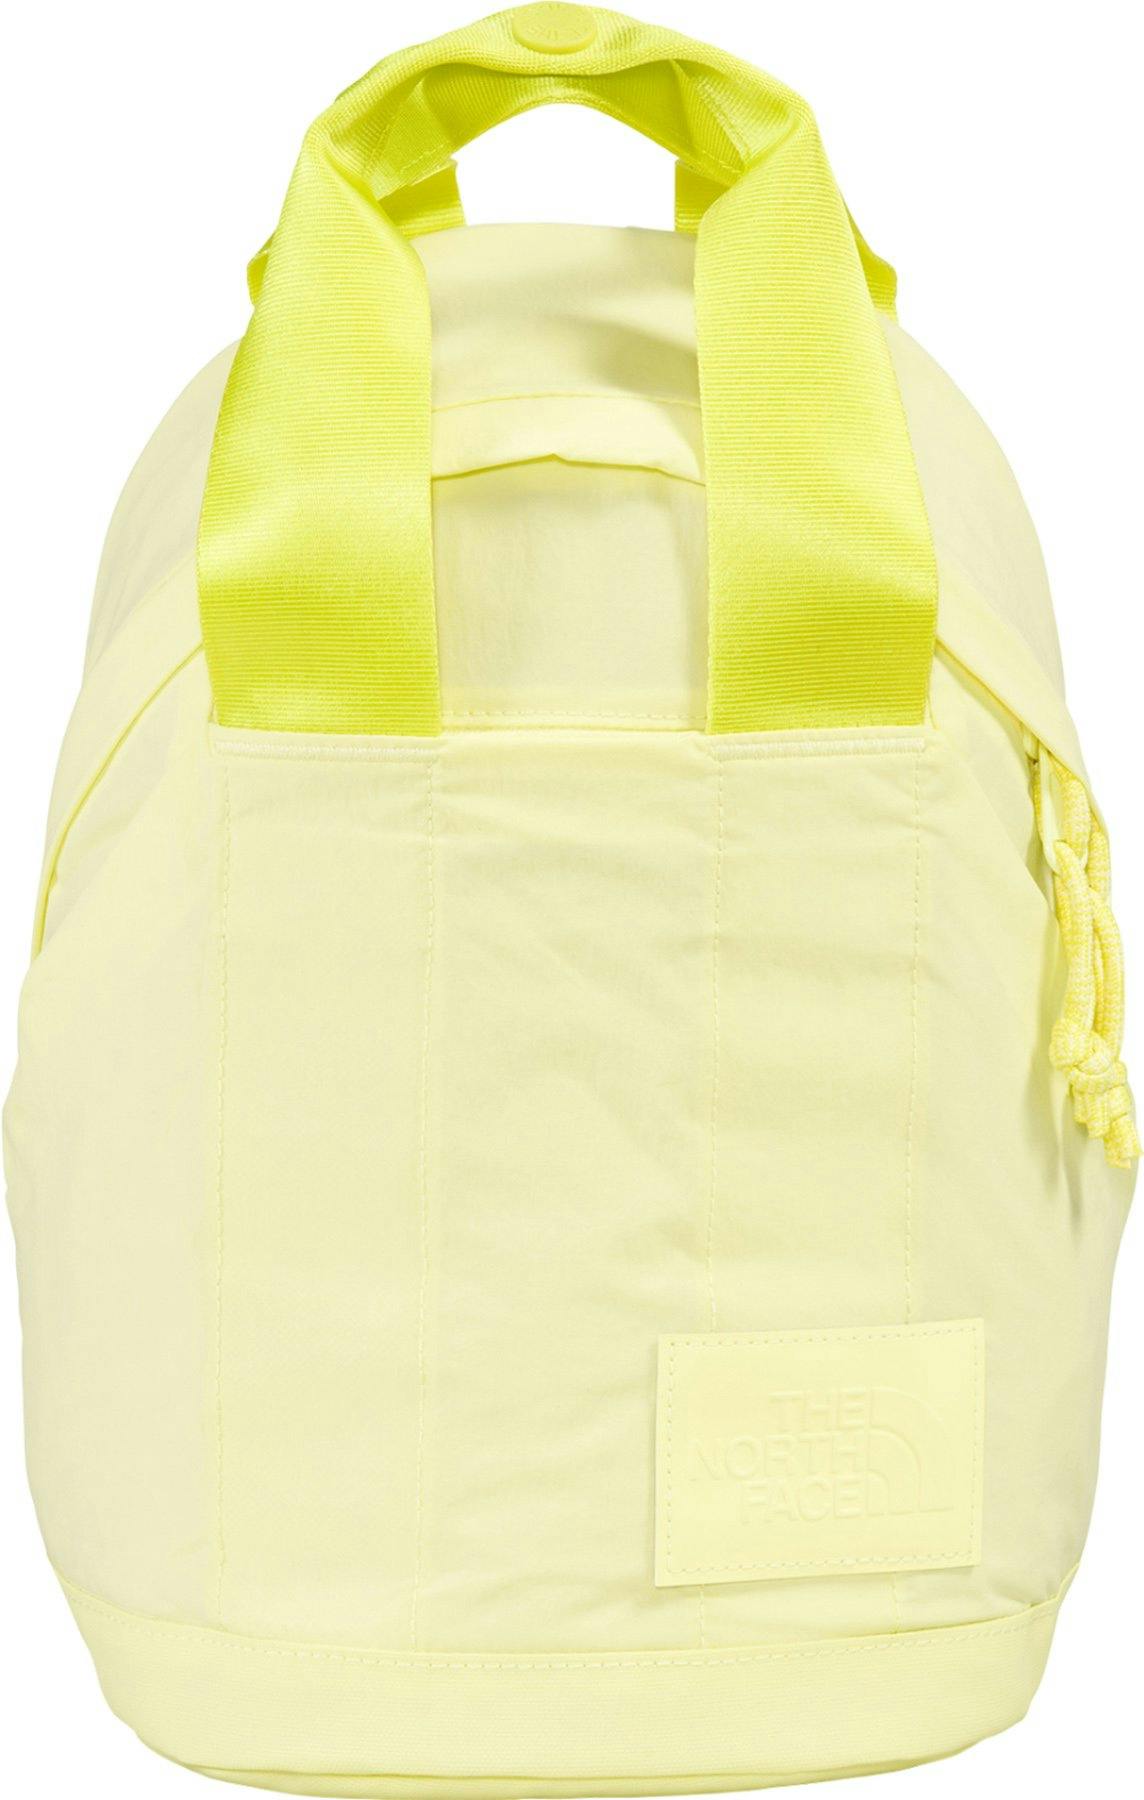 Product image for Never Stop Mini Backpack 7L - Women’s